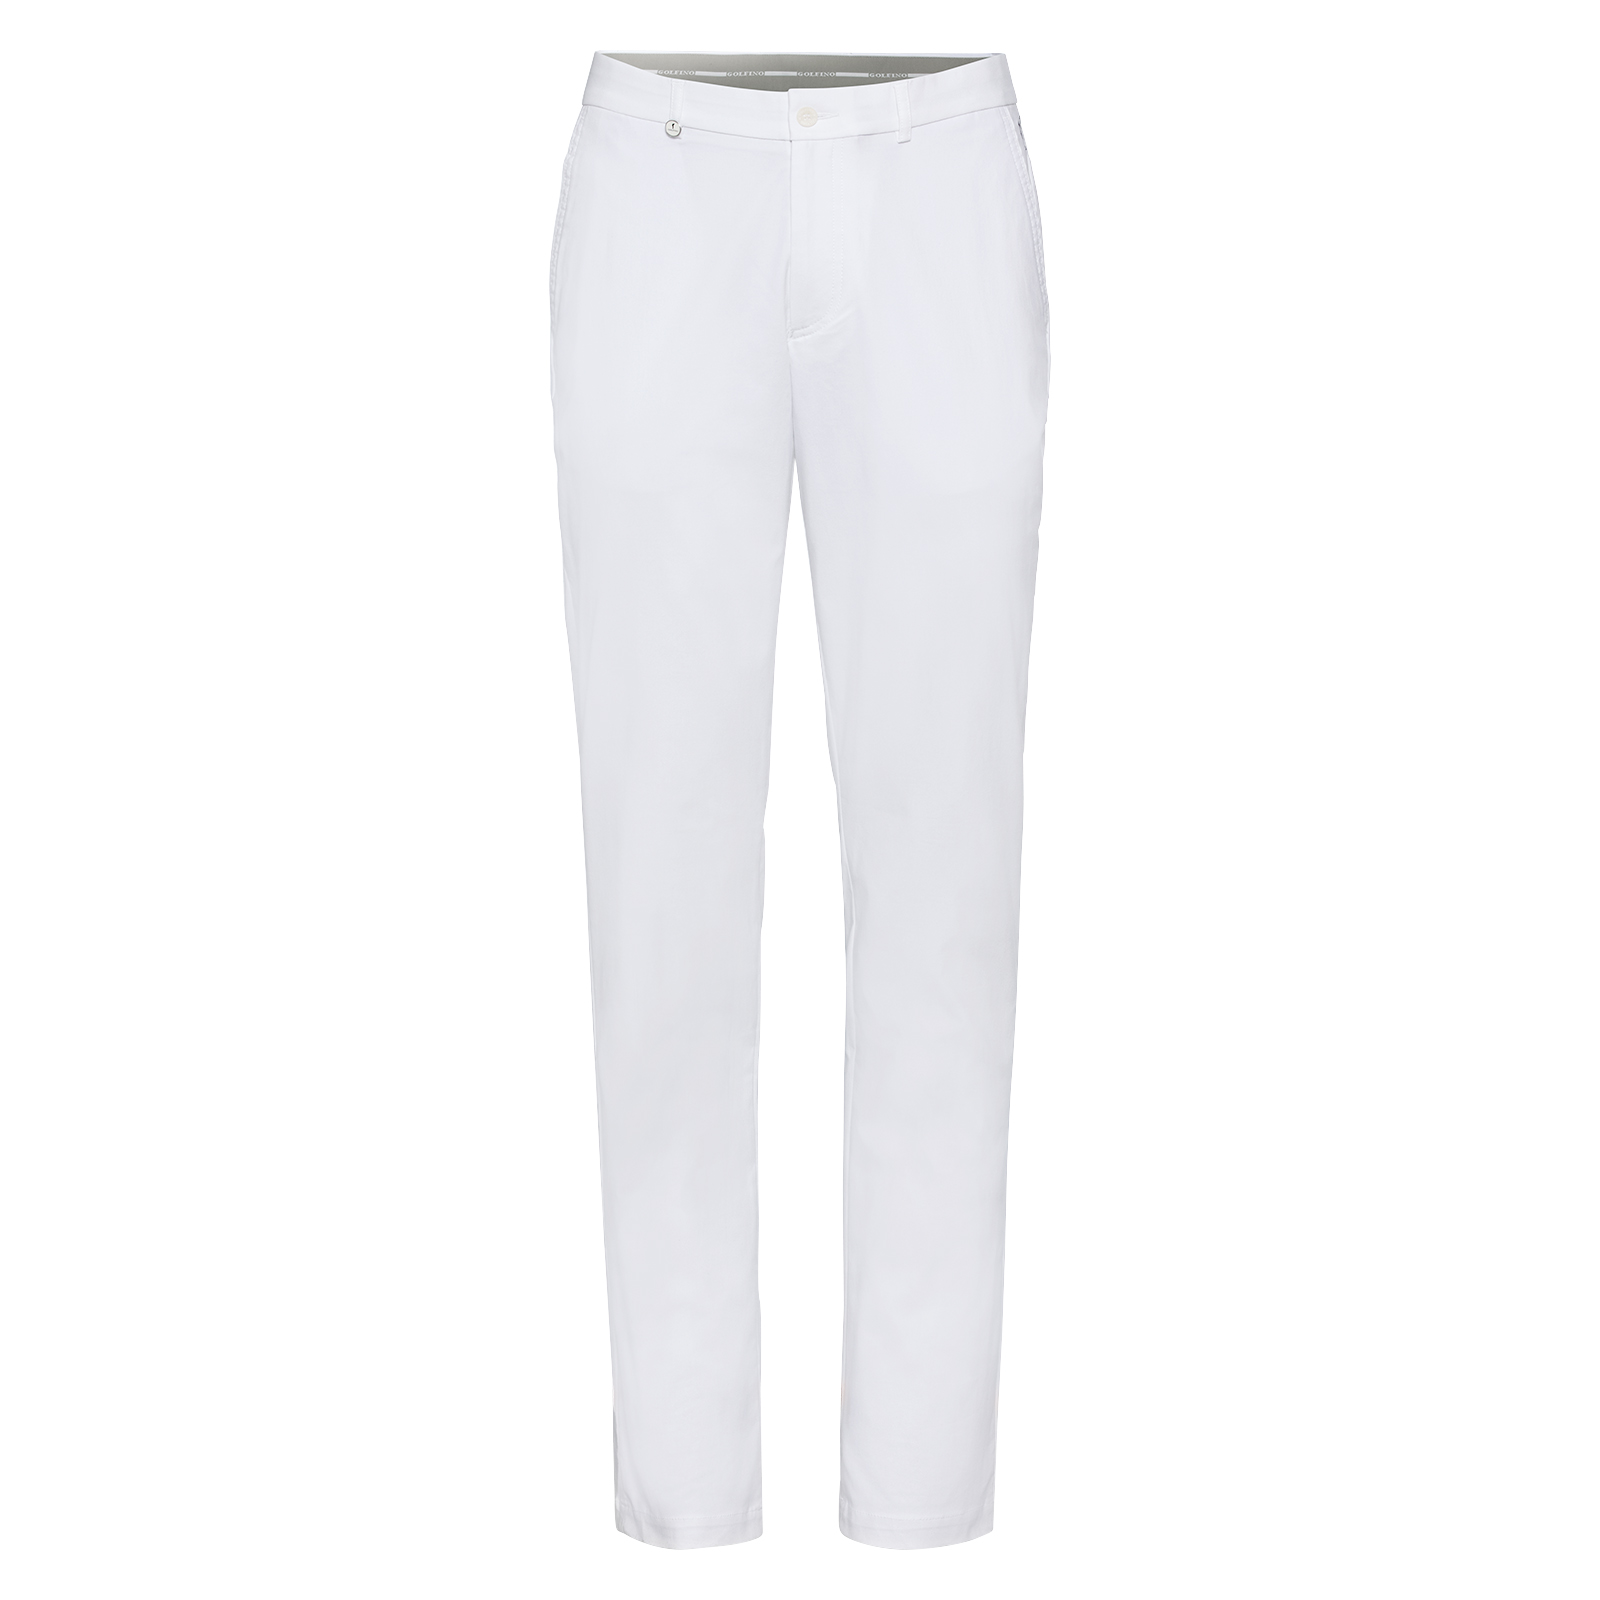 Men's golf trousers with stretch component 